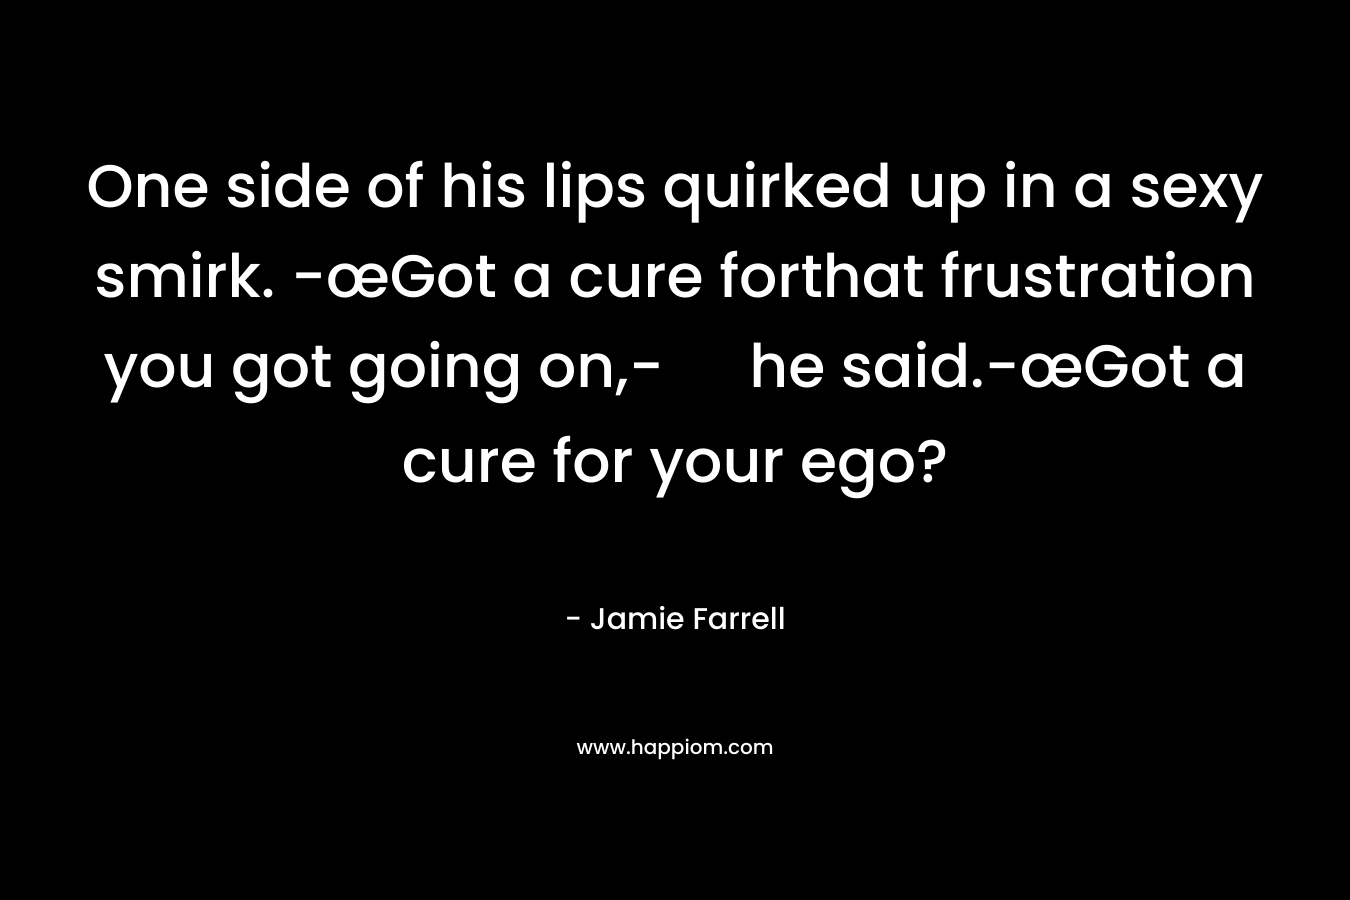 One side of his lips quirked up in a sexy smirk. -œGot a cure forthat frustration you got going on,- he said.-œGot a cure for your ego? – Jamie Farrell